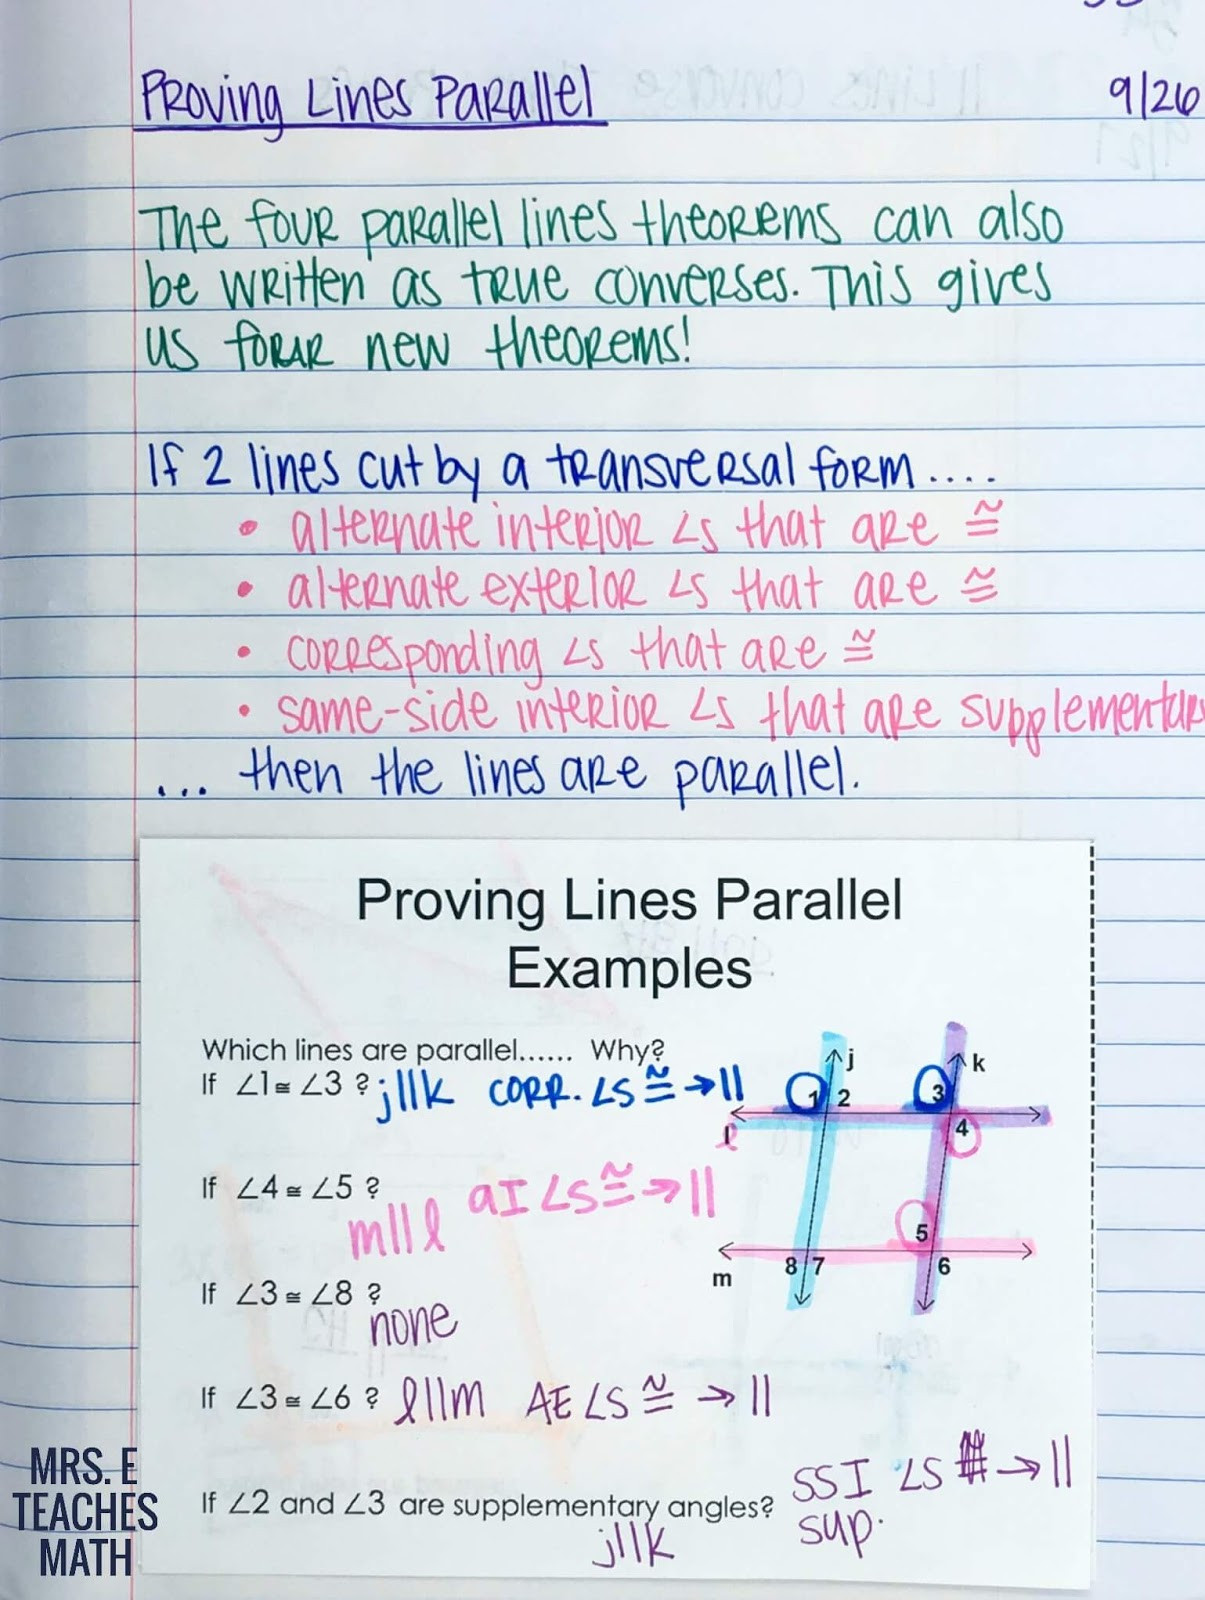 Proving Lines Parallel Worksheet Parallel Lines Inb Pages